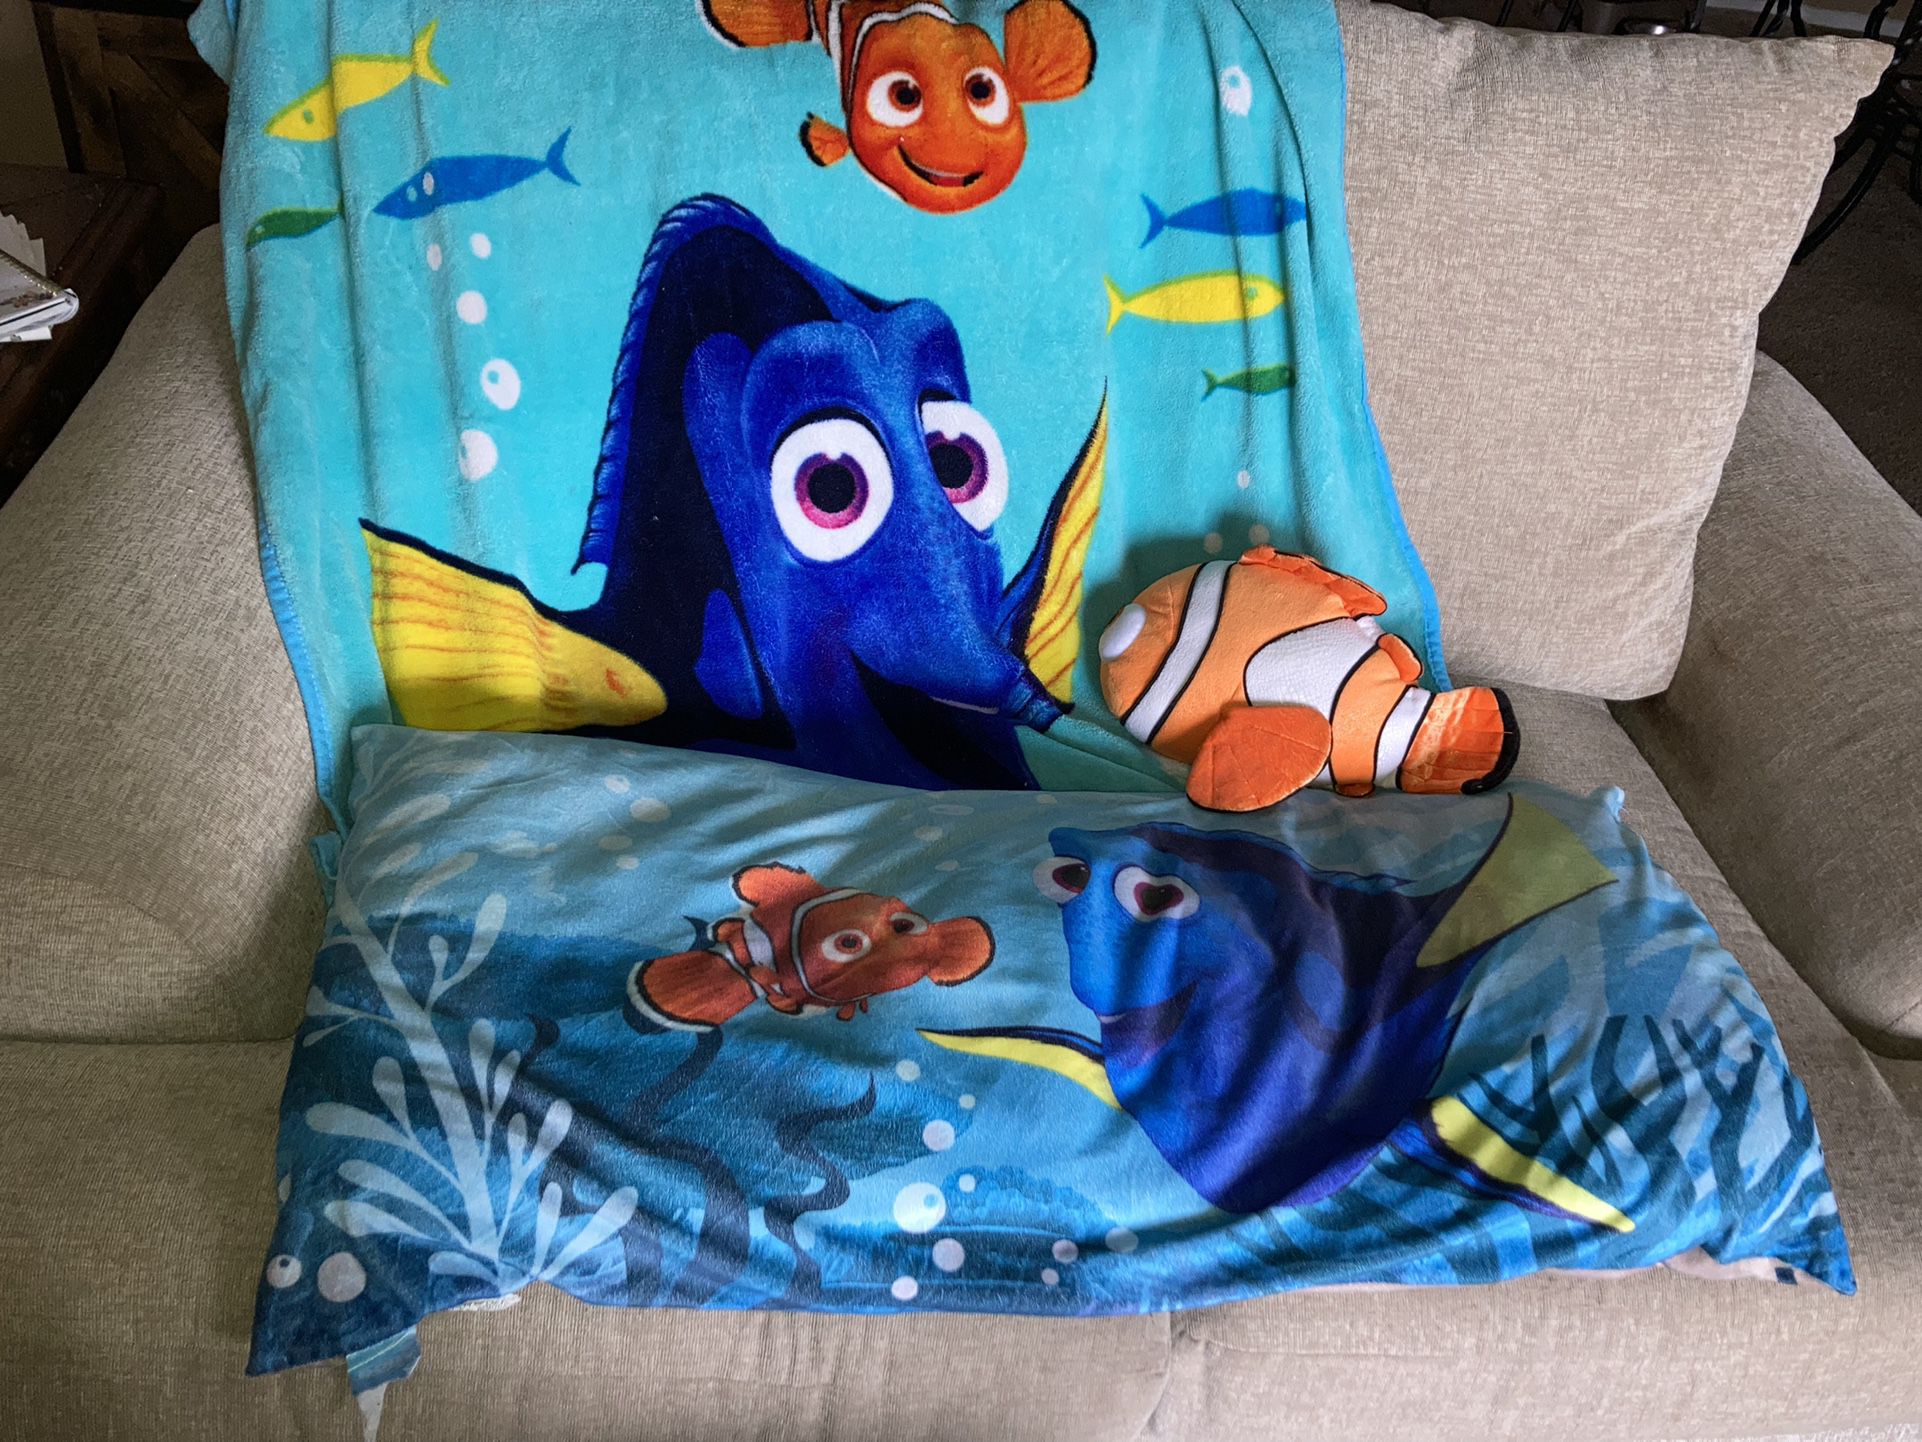 Finding Nemo things: 5 Items 